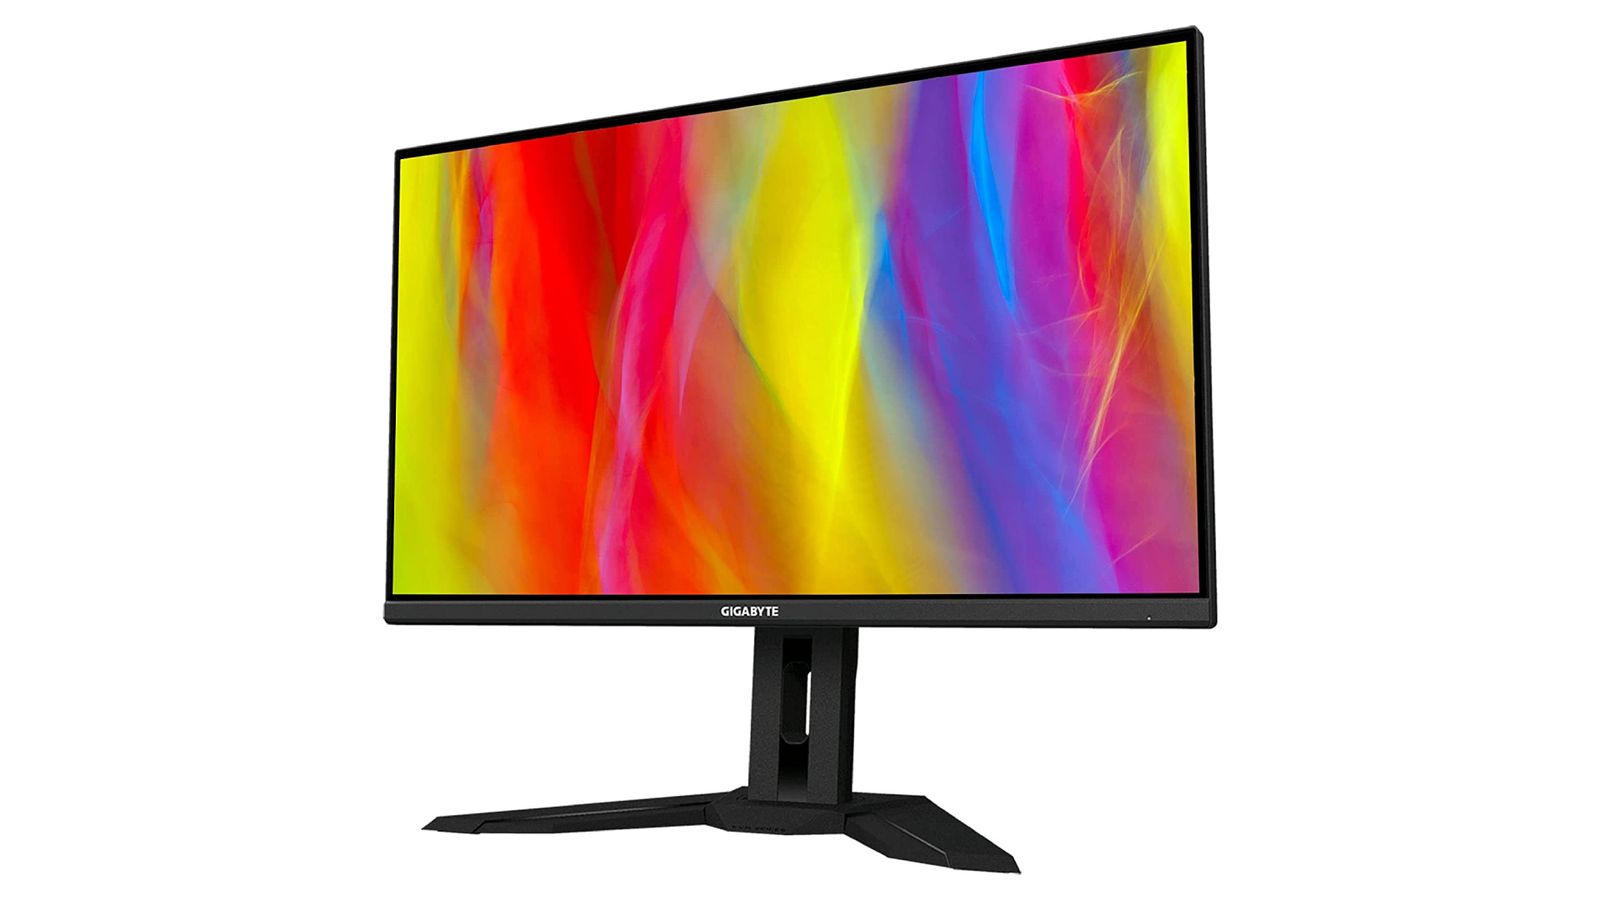 Gigabyte M32U product image of a black monitor with yellow, red, pink, purple, and blue streaks across the display.